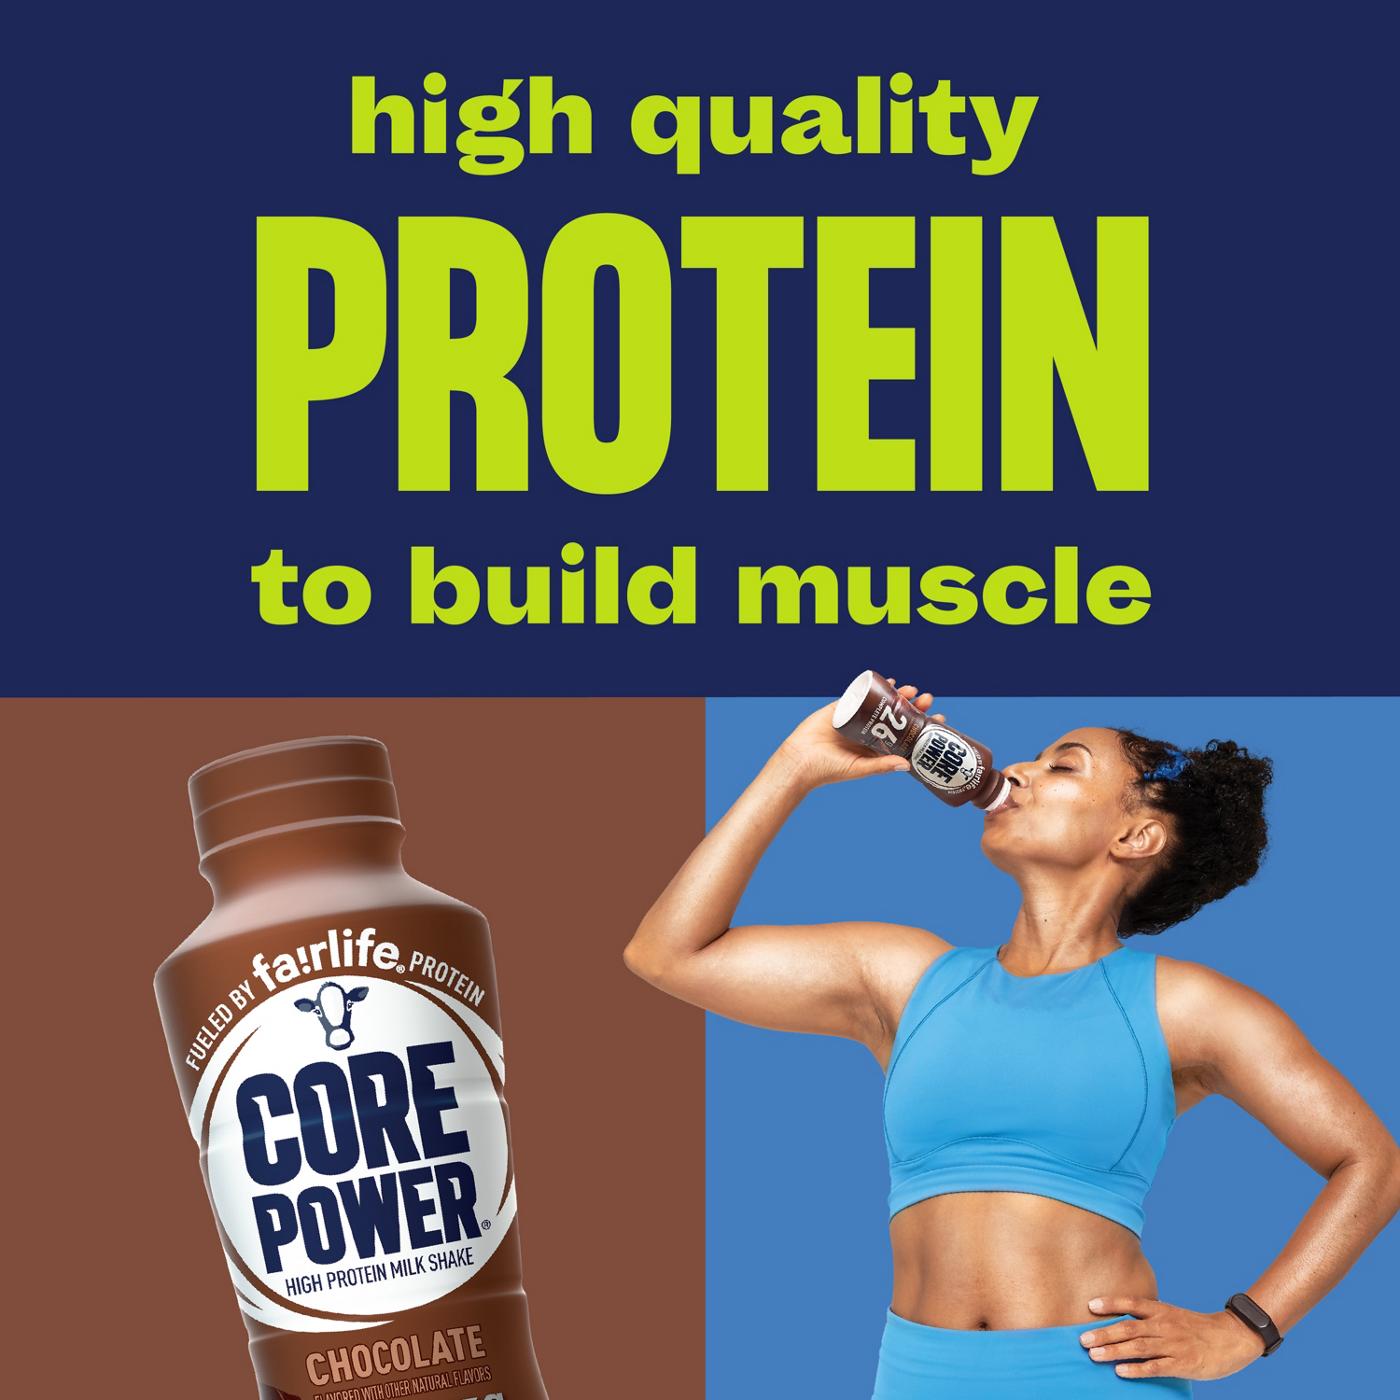 Core Power Complete 26g Protein Shakes - Chocolate, 12 Pk; image 4 of 5